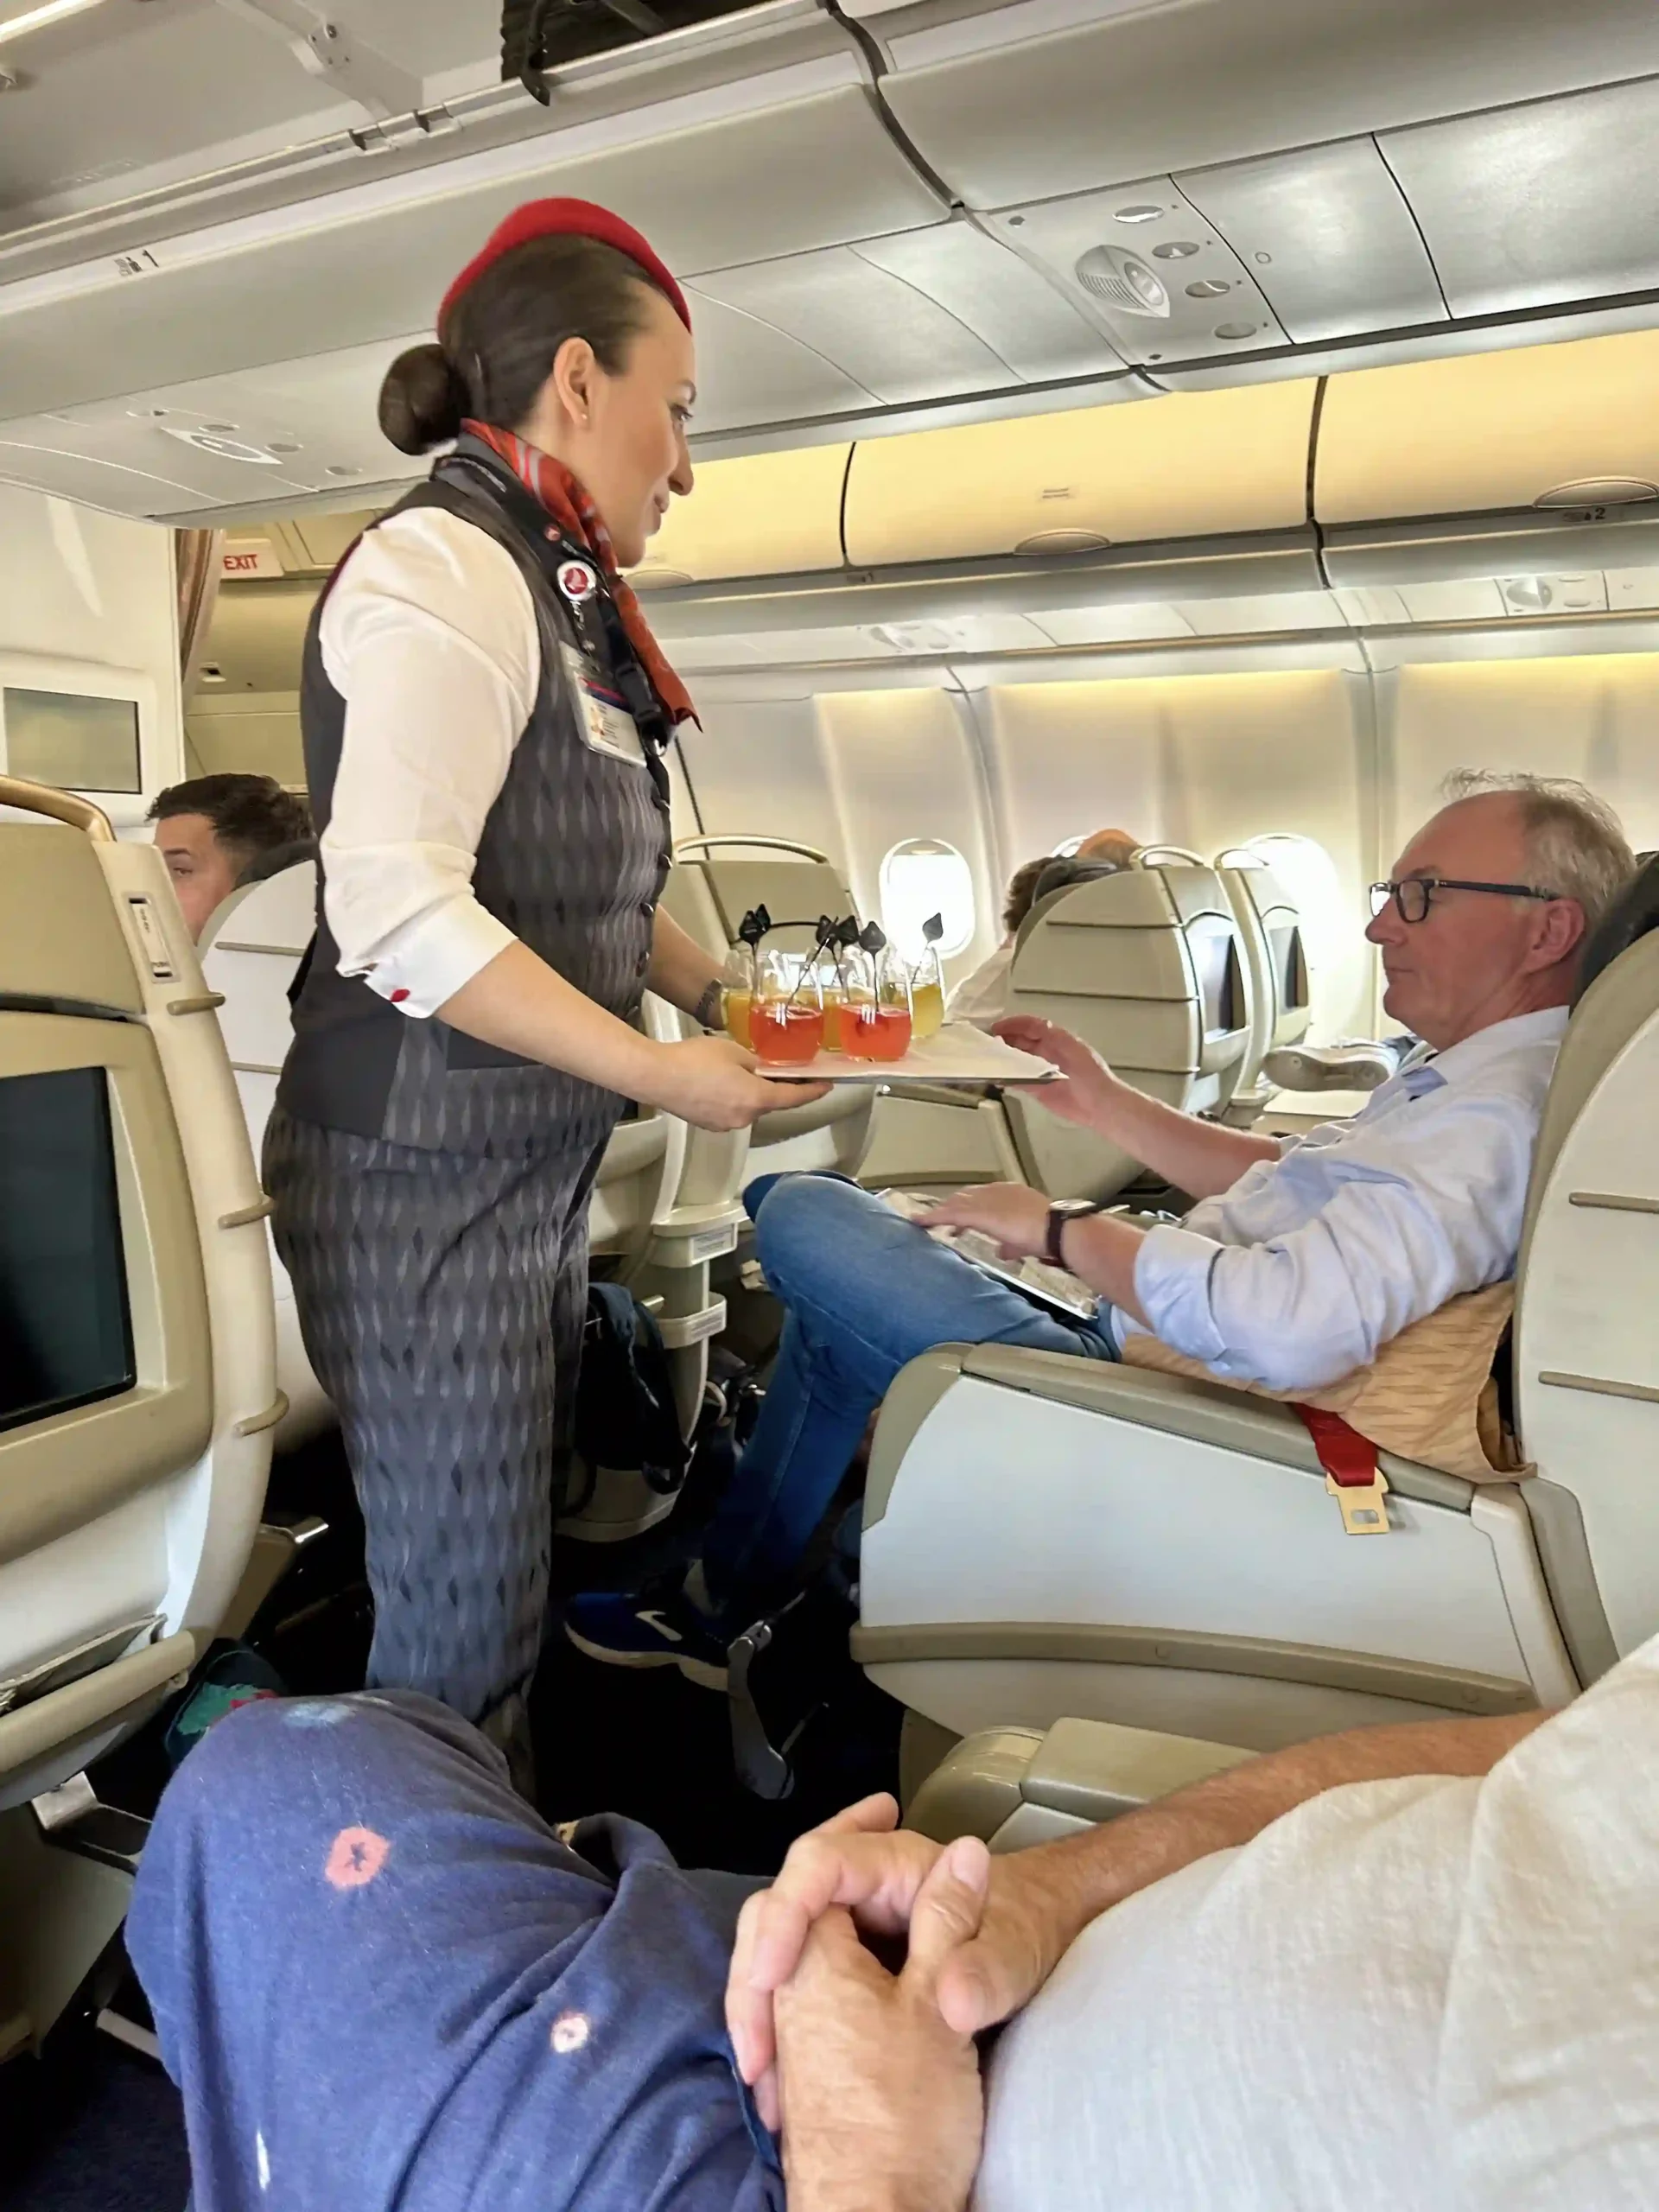 a woman serving drinks on a tray in an airplane